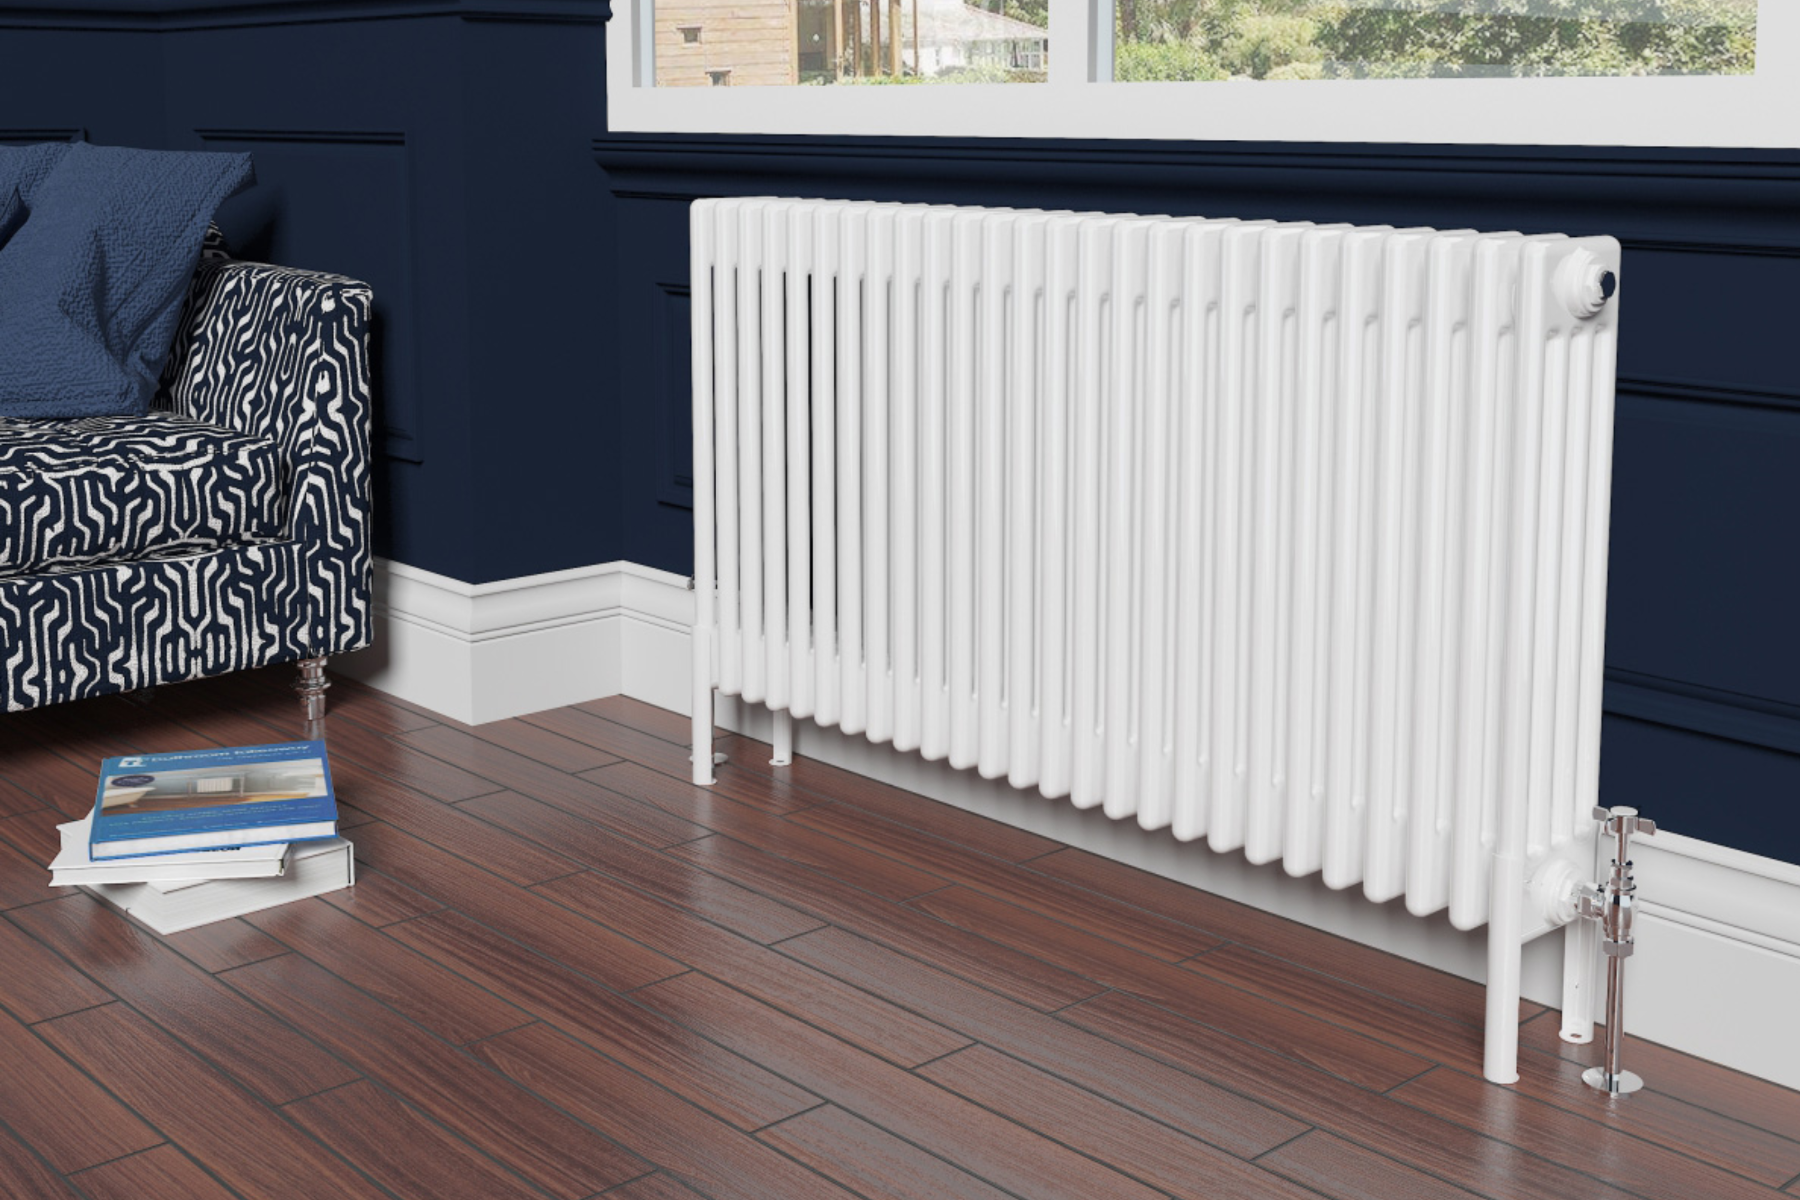 White Radiator In Lounge Against Navy Blue Wall